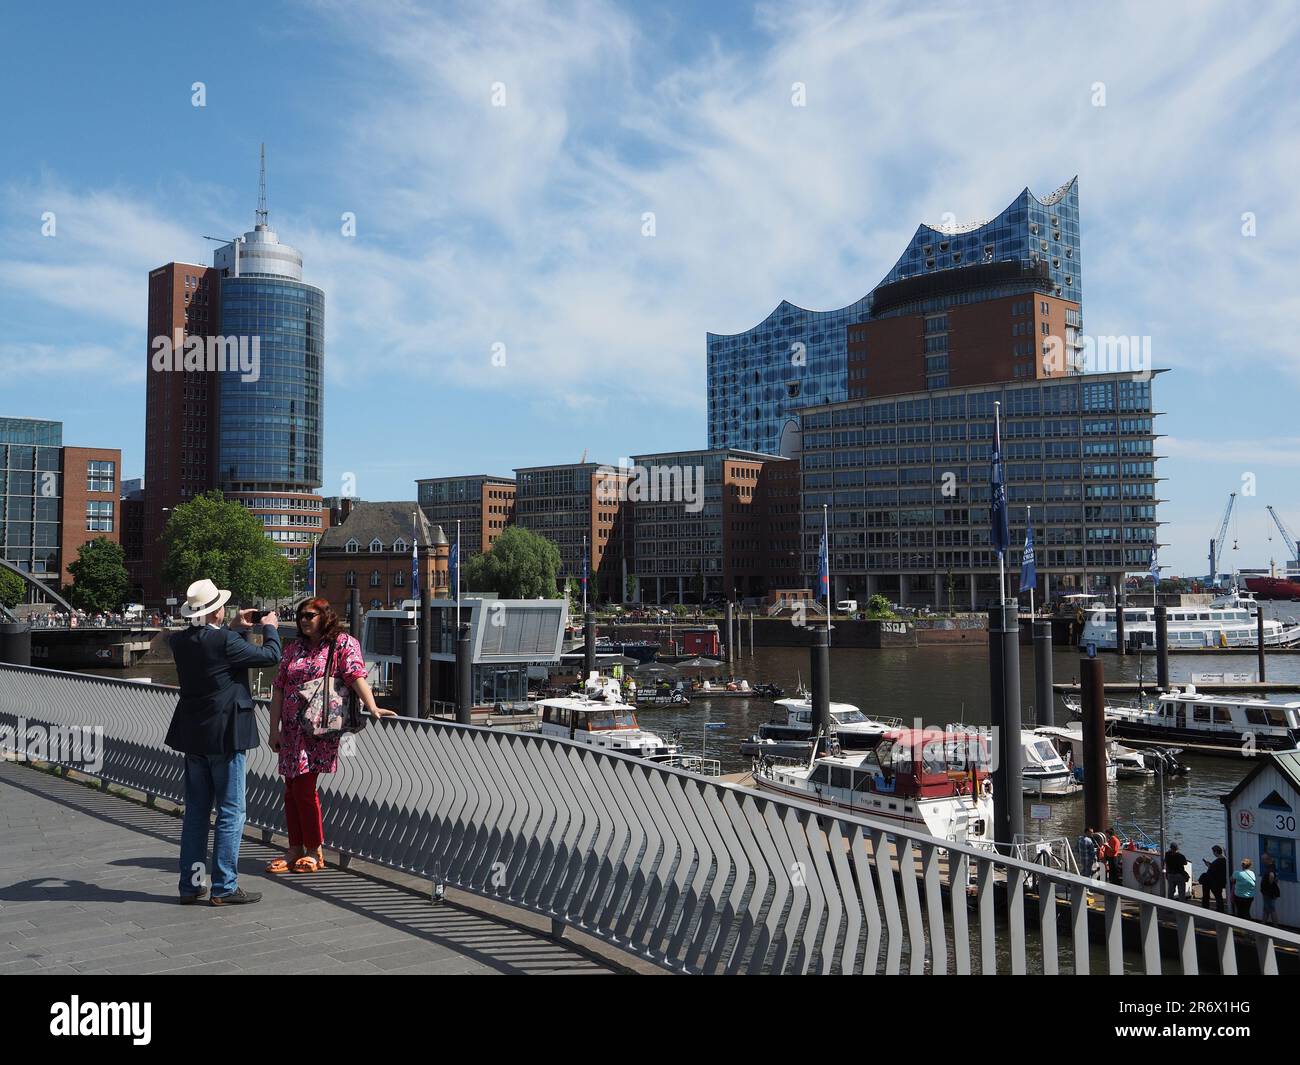 Couple enjoying themselves on a trip to Hamburg, Germany on the bank of the river Elbe with the famous Elbphilharmonie building in the background Stock Photo